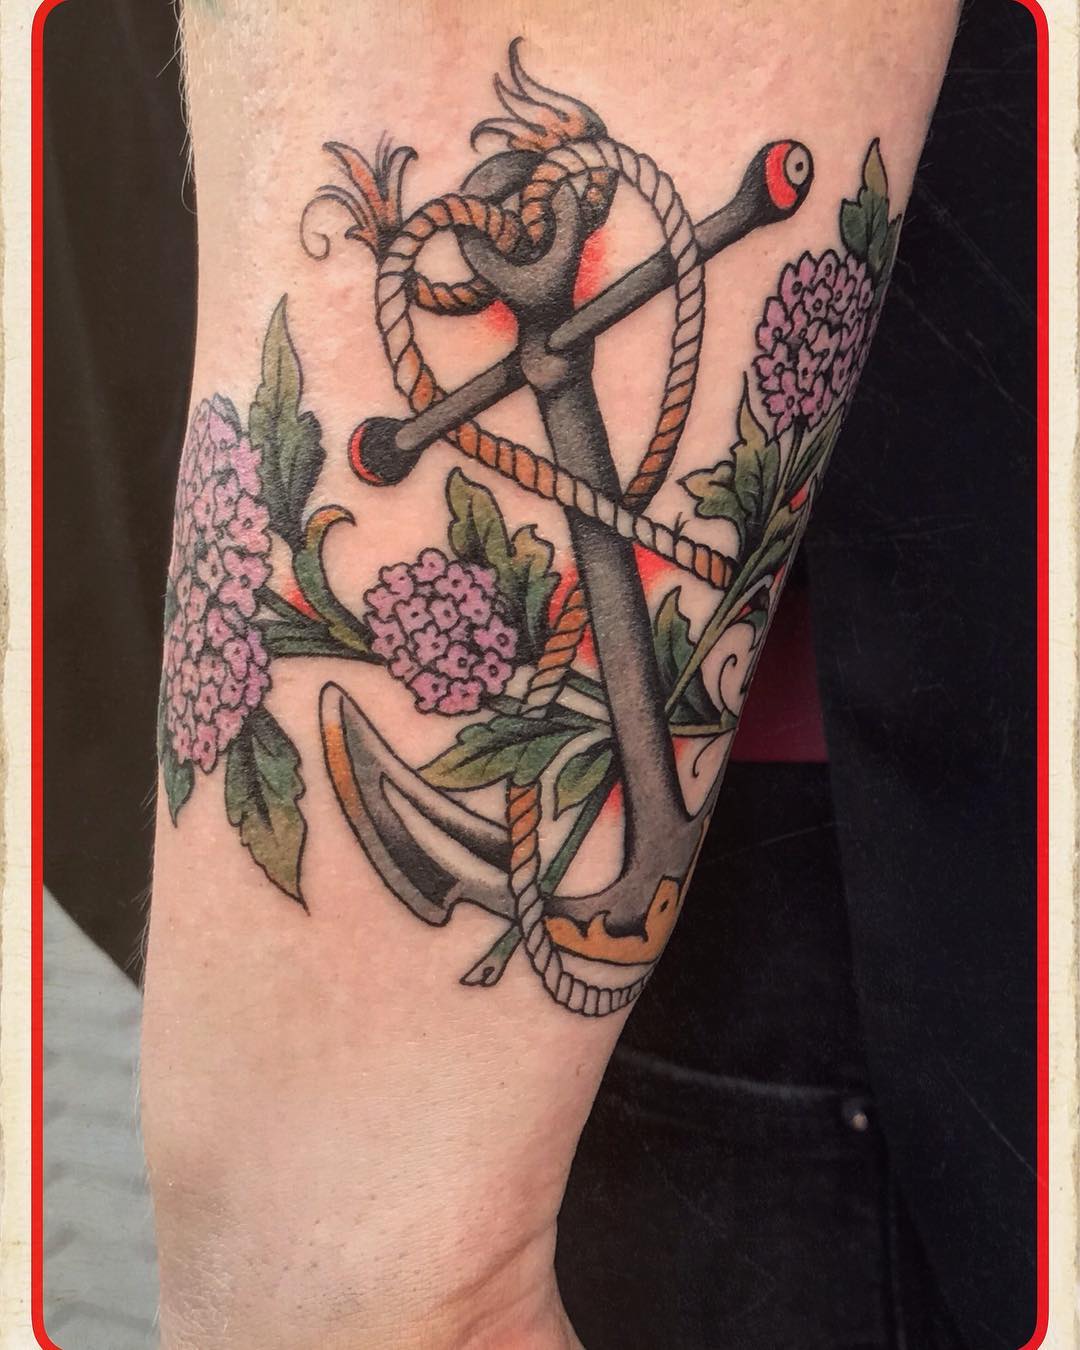 Anchor, rope and flowers done. Please more of this.
#matthiasblossfeld #sideshow